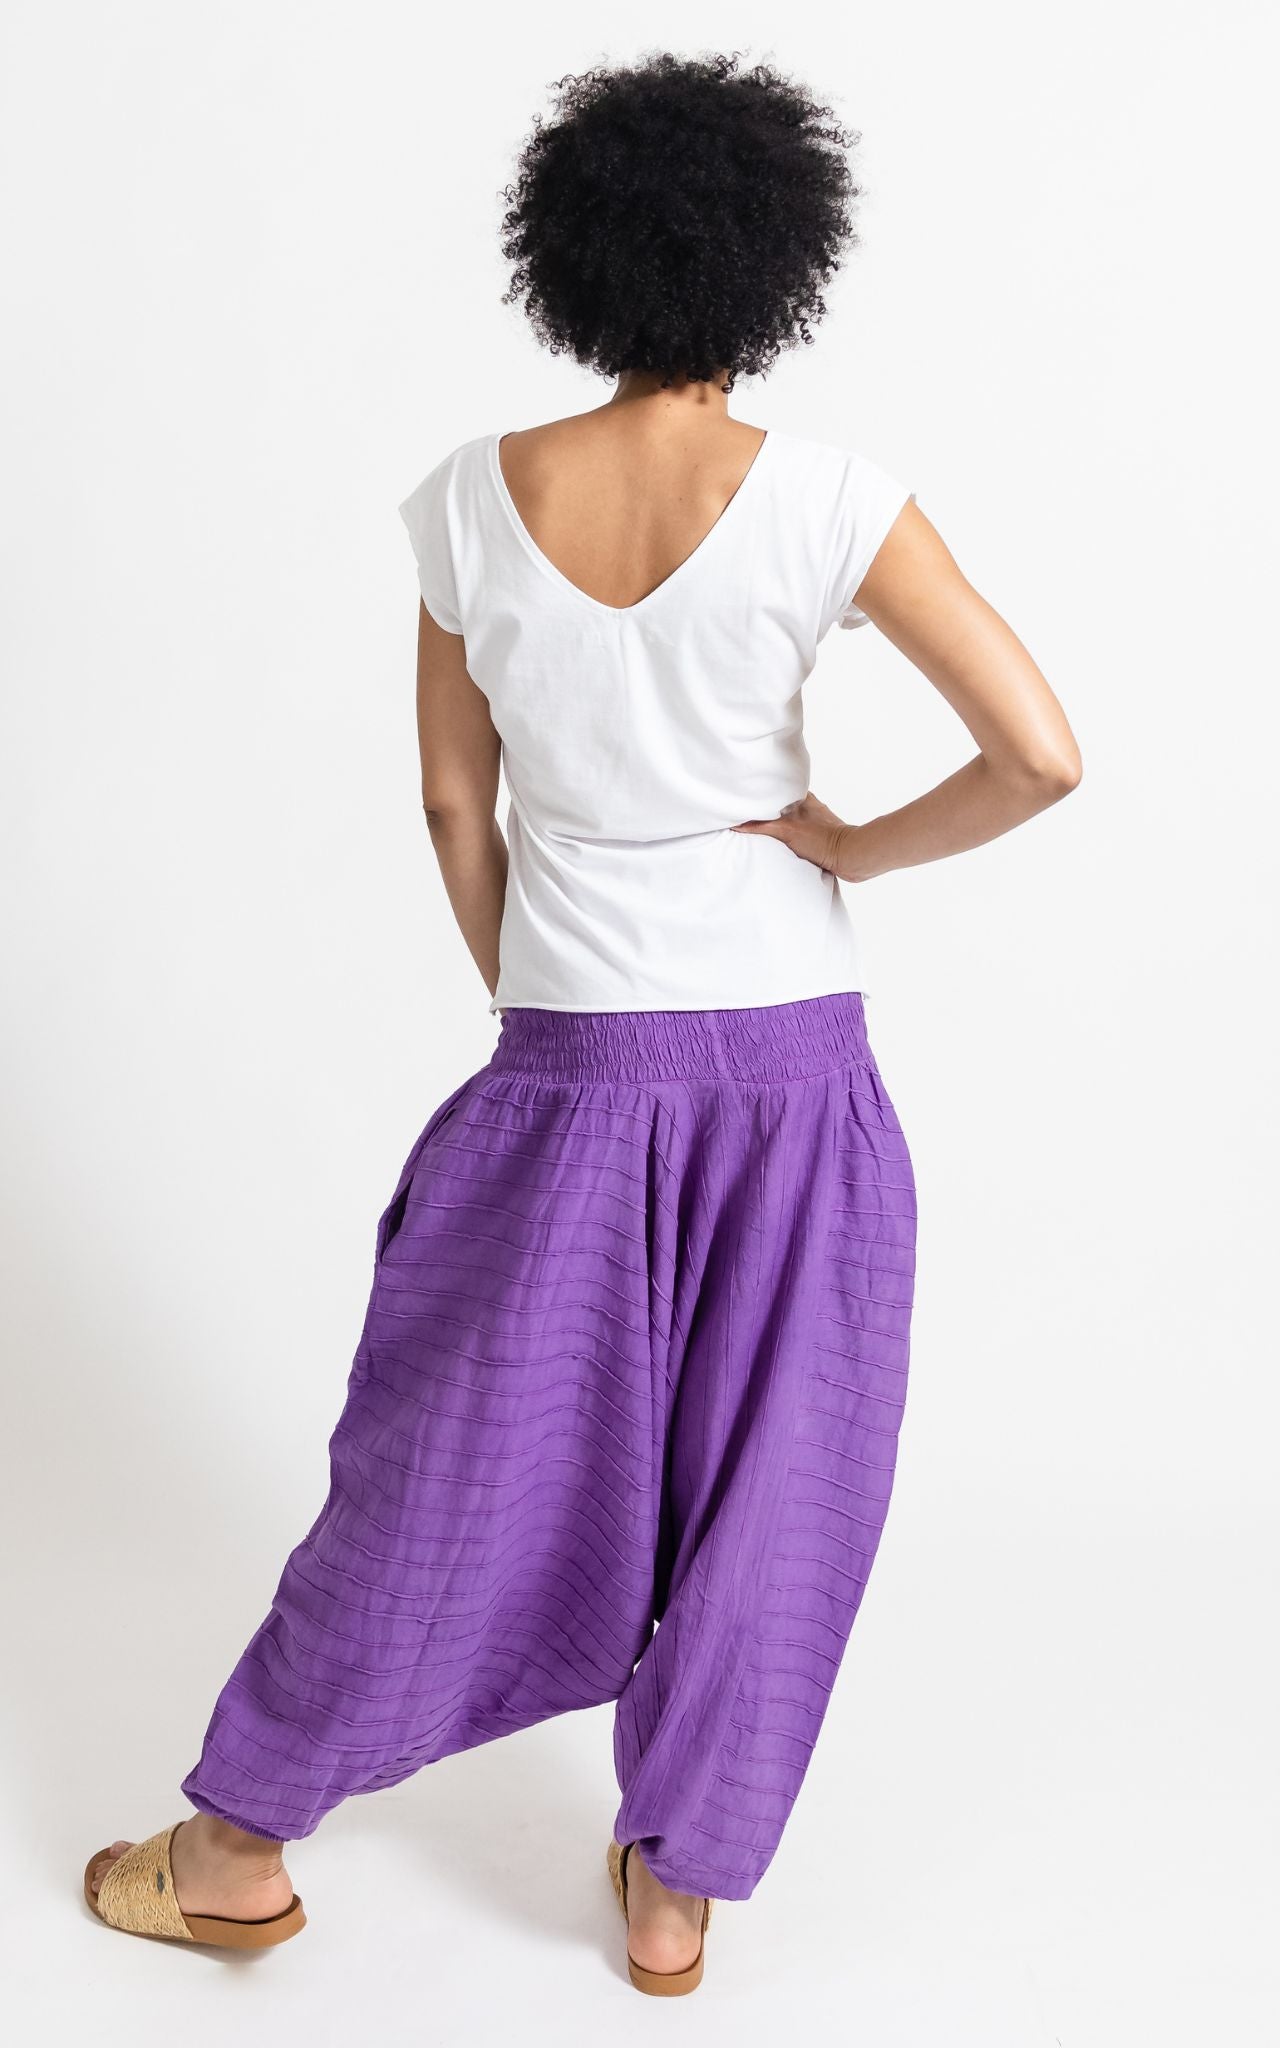 Surya Australia Ethical Cotton Low Crotch Harem Style Pants made in Nepal - Purple